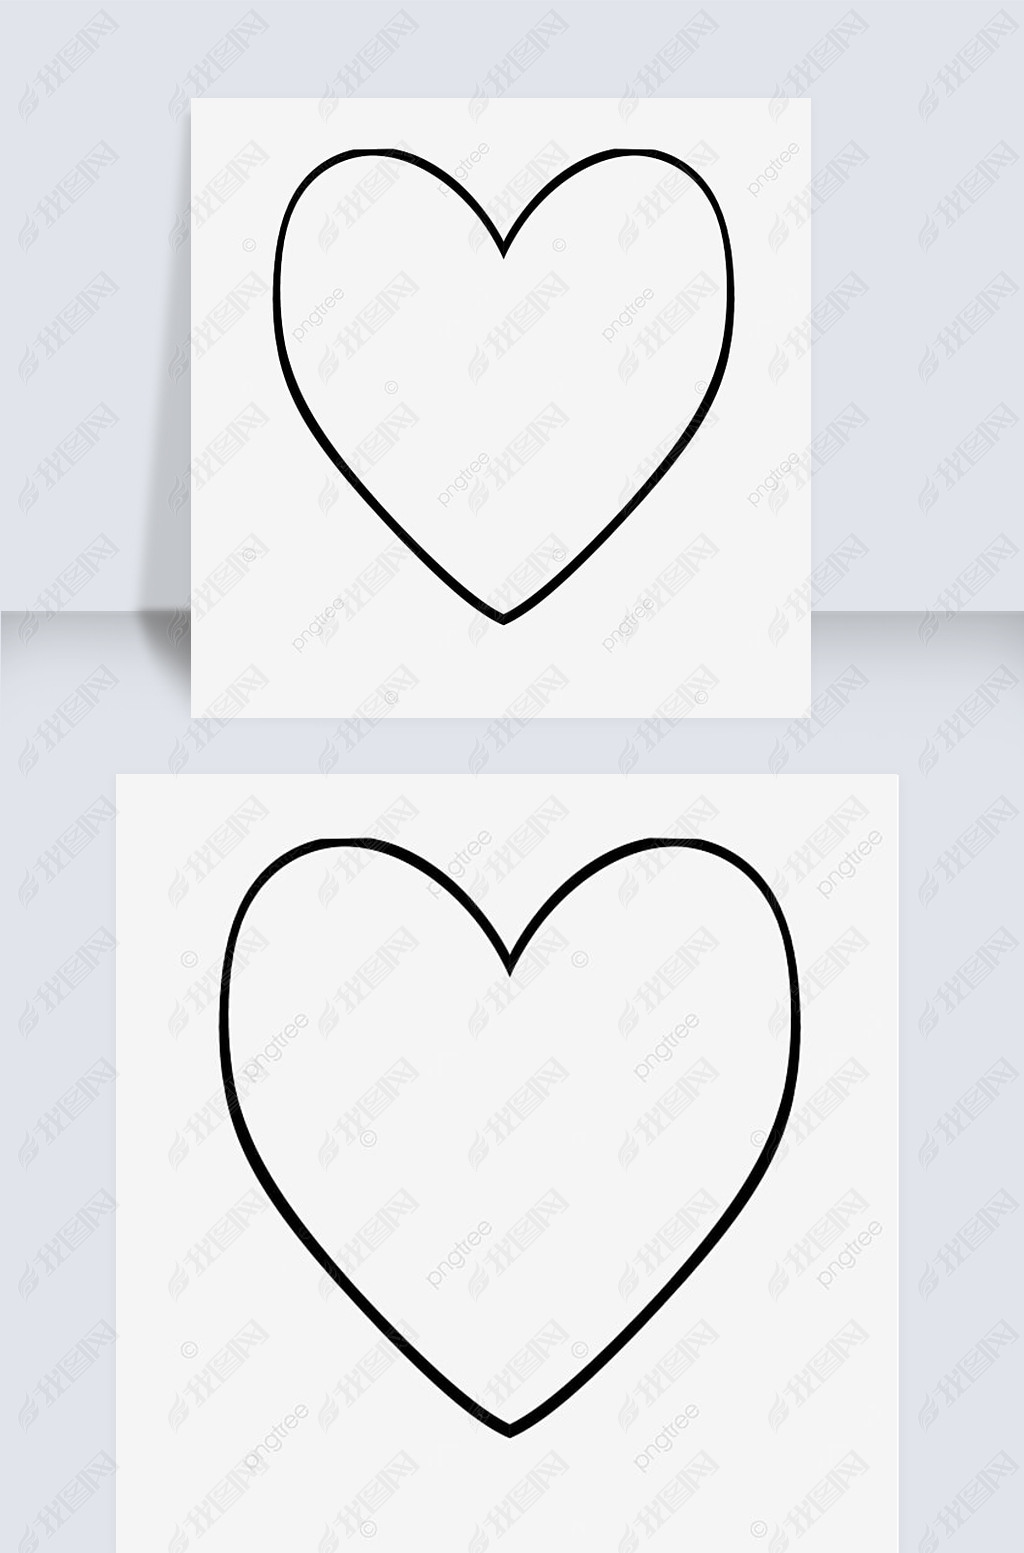 heart clipart black and whiteװ